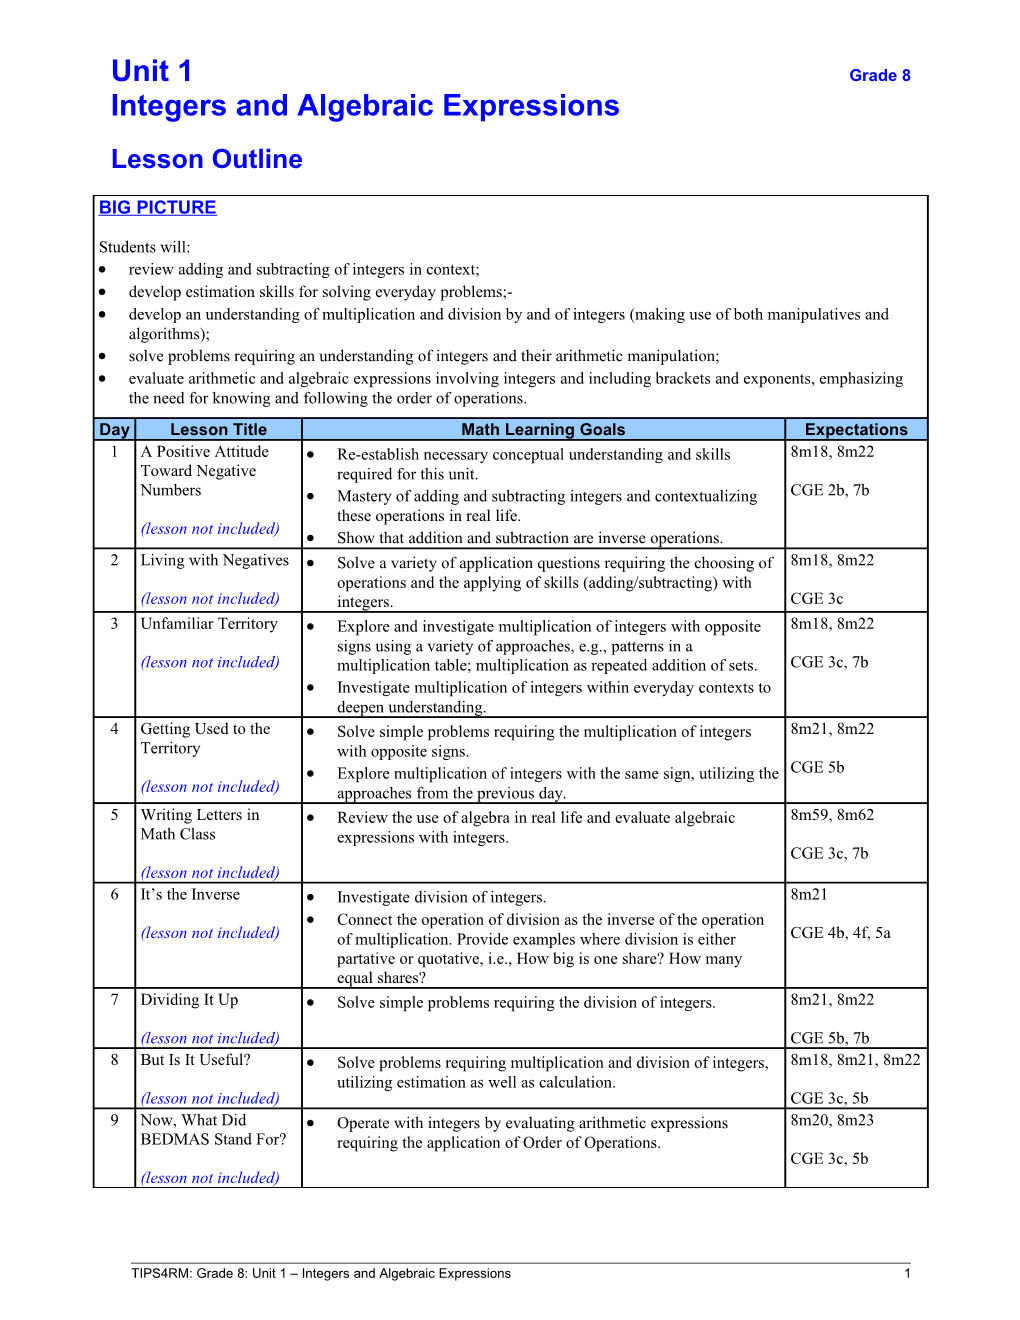 Interpreting the Lesson Outline Template s1